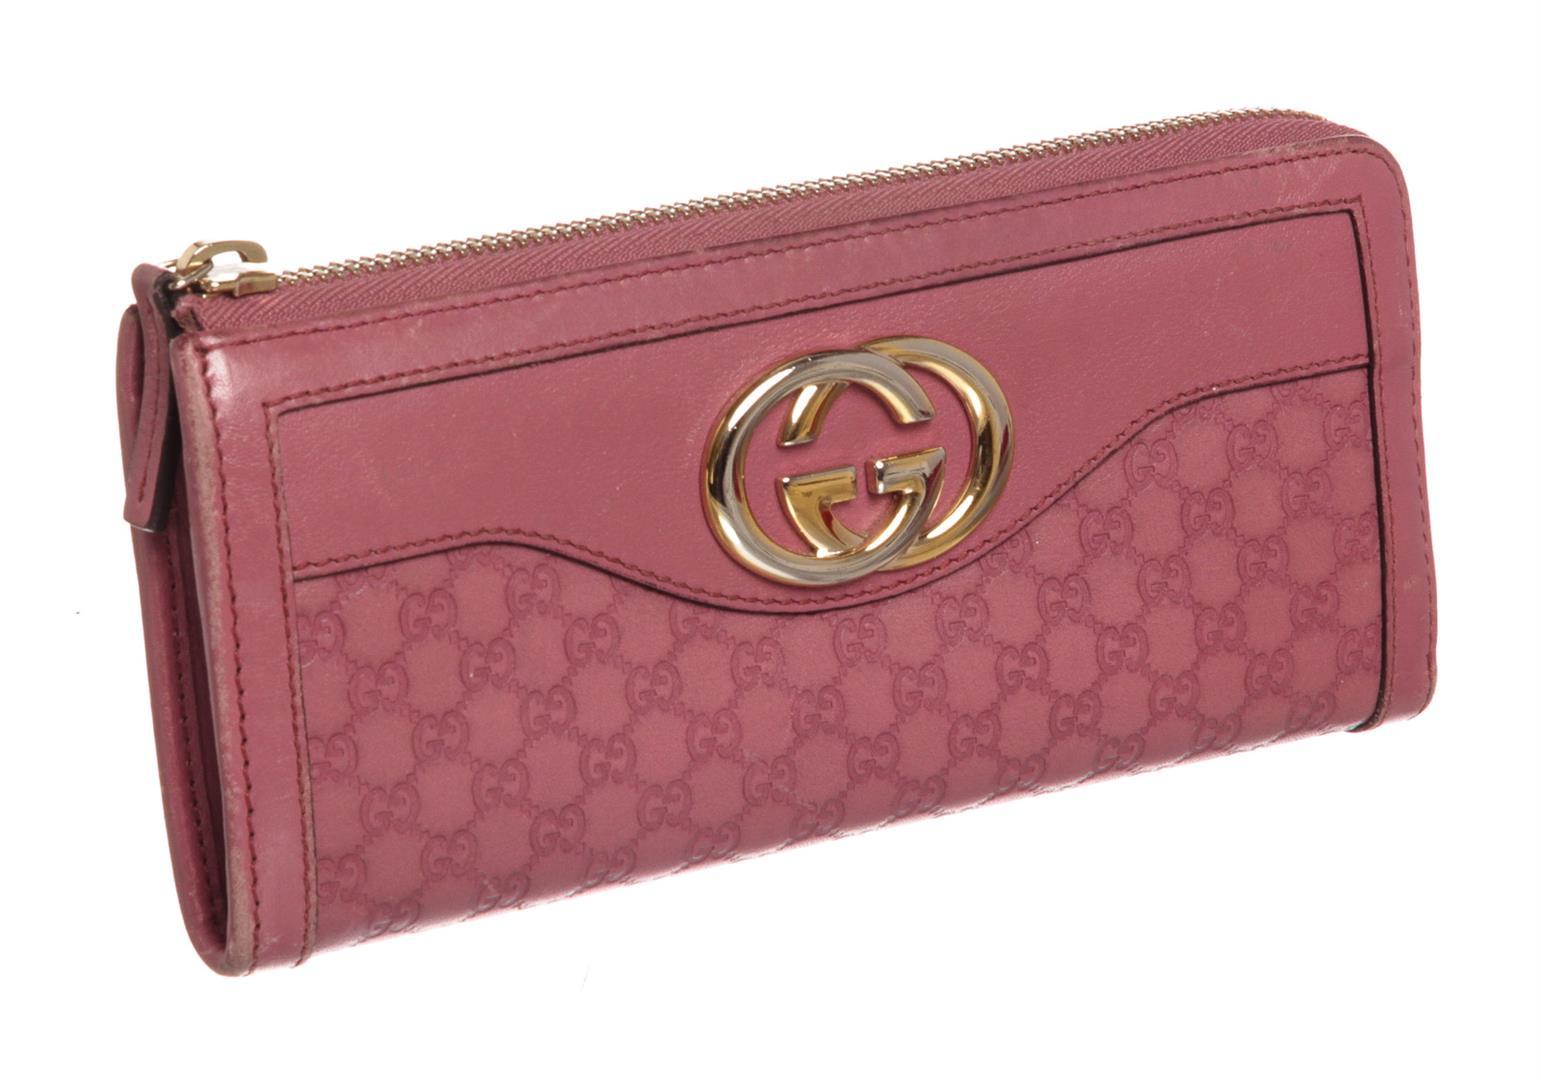 Gucci Pink Guccissima Leather Zippy Wallet